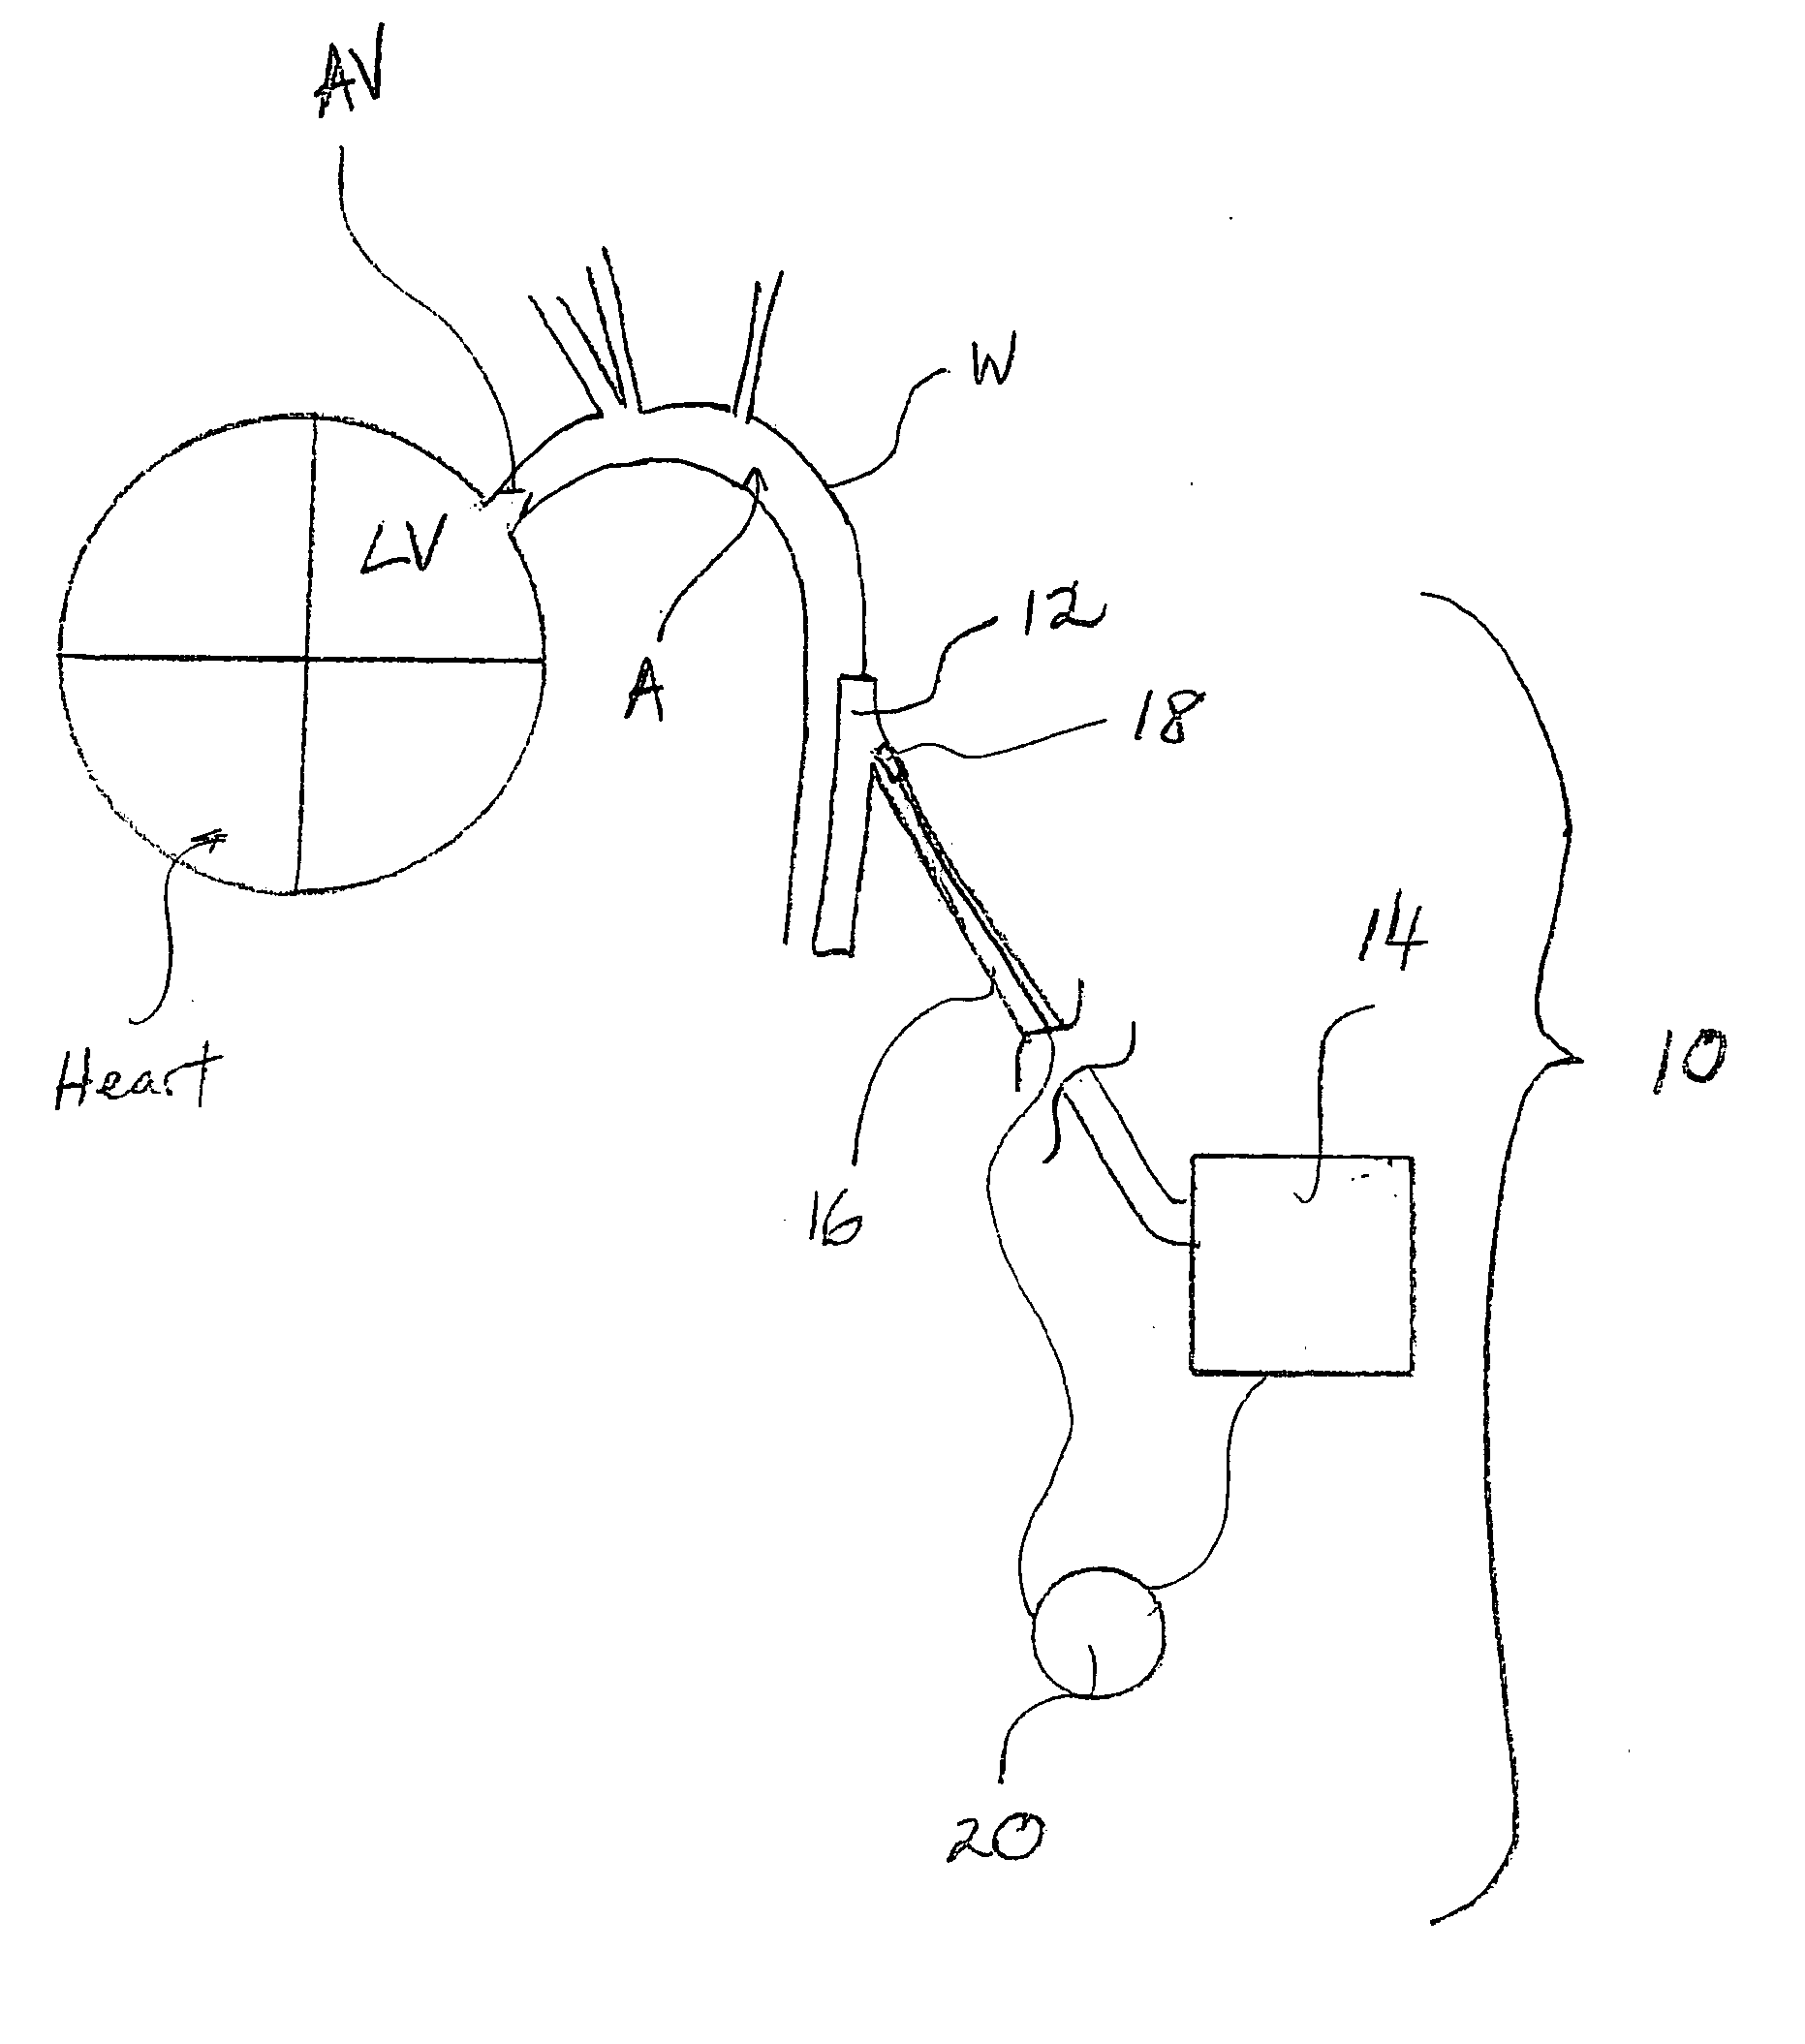 Synchronization system between aortic valve and cardiac assist device